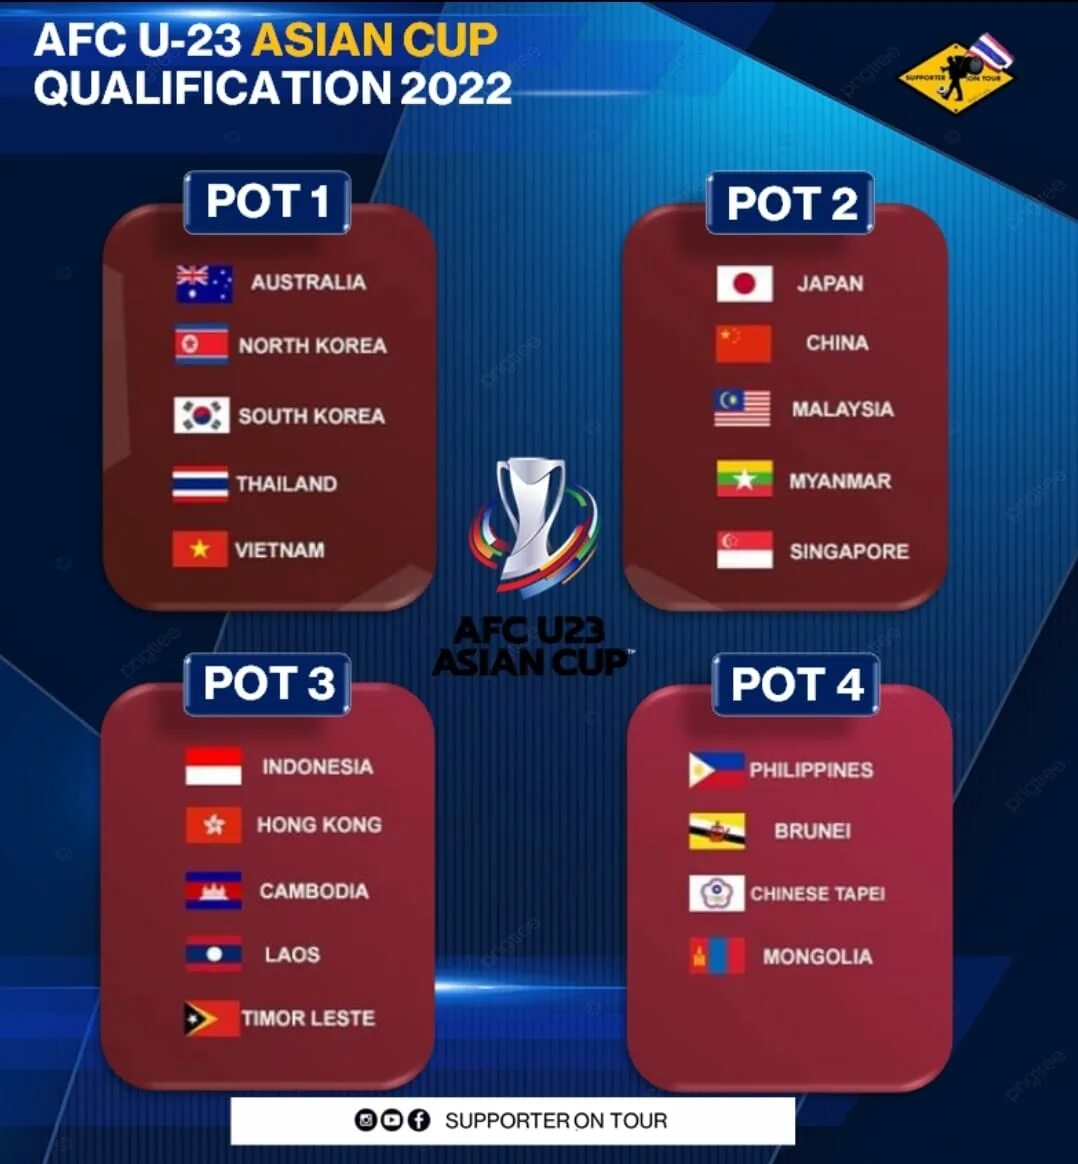 AFC Cup 2022. U23 Asian Cup 2022. AFC u23 Asian Cup. AFC u23 Asian Cup 2022. Afc cup